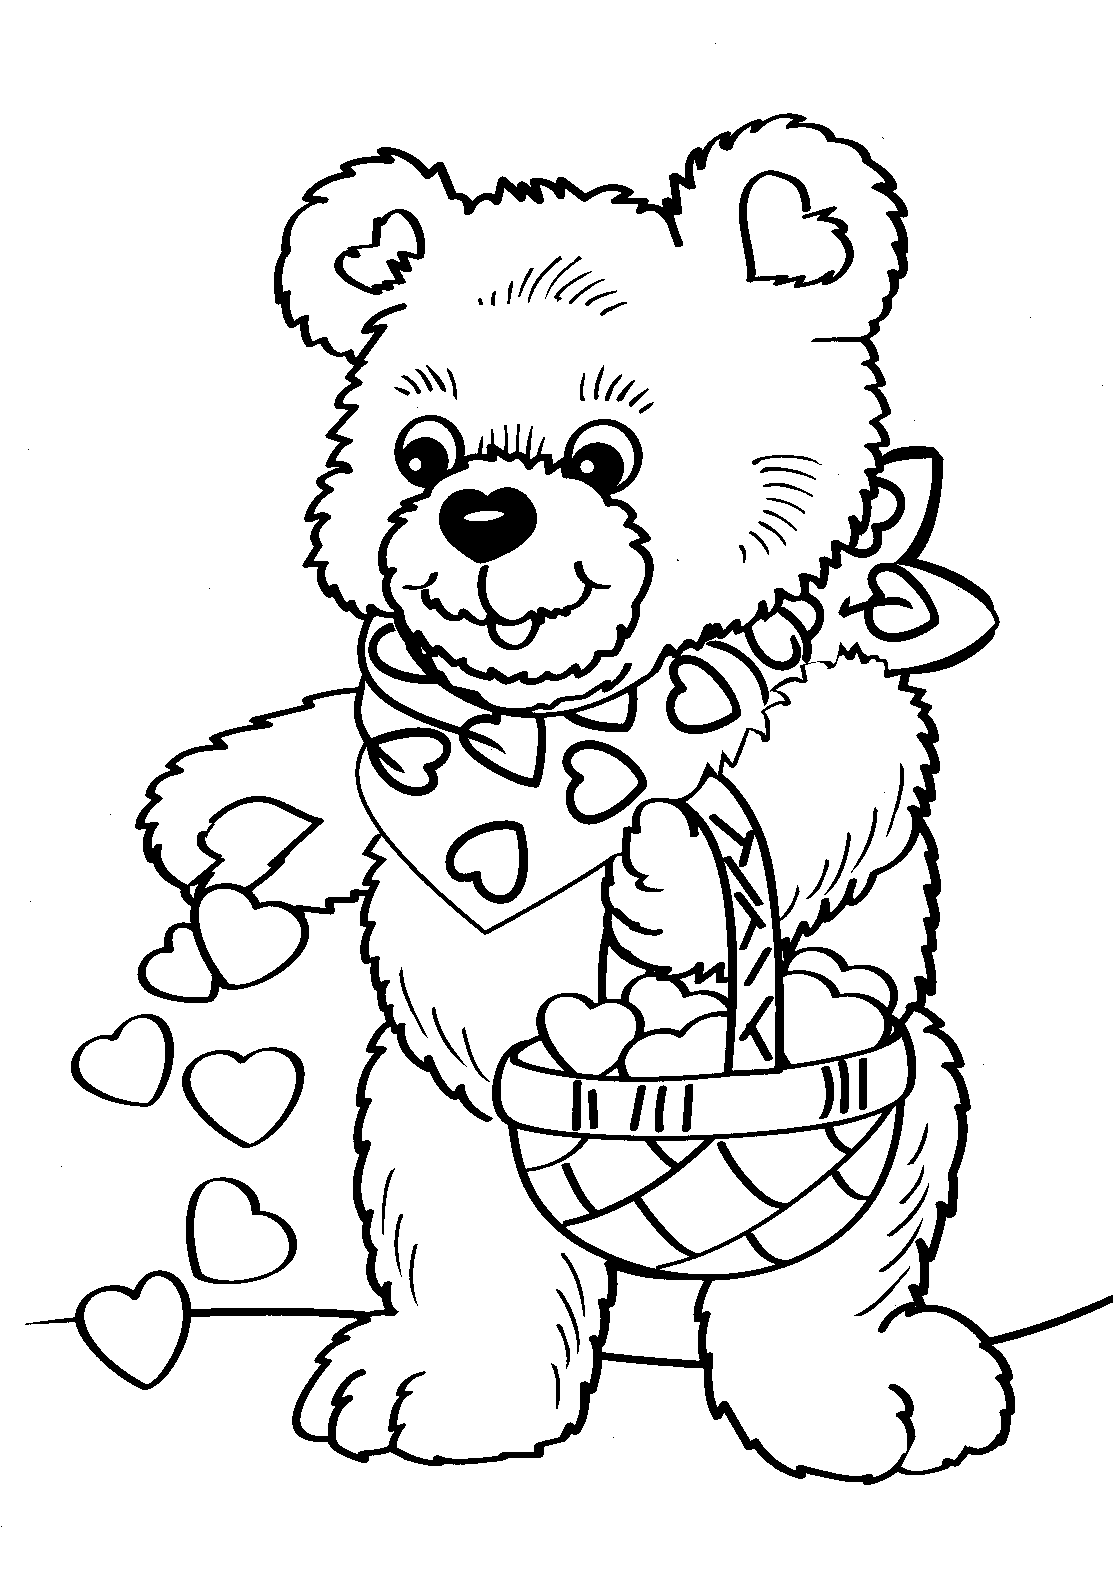 Download Free Printable Valentine's Day Coloring Pages